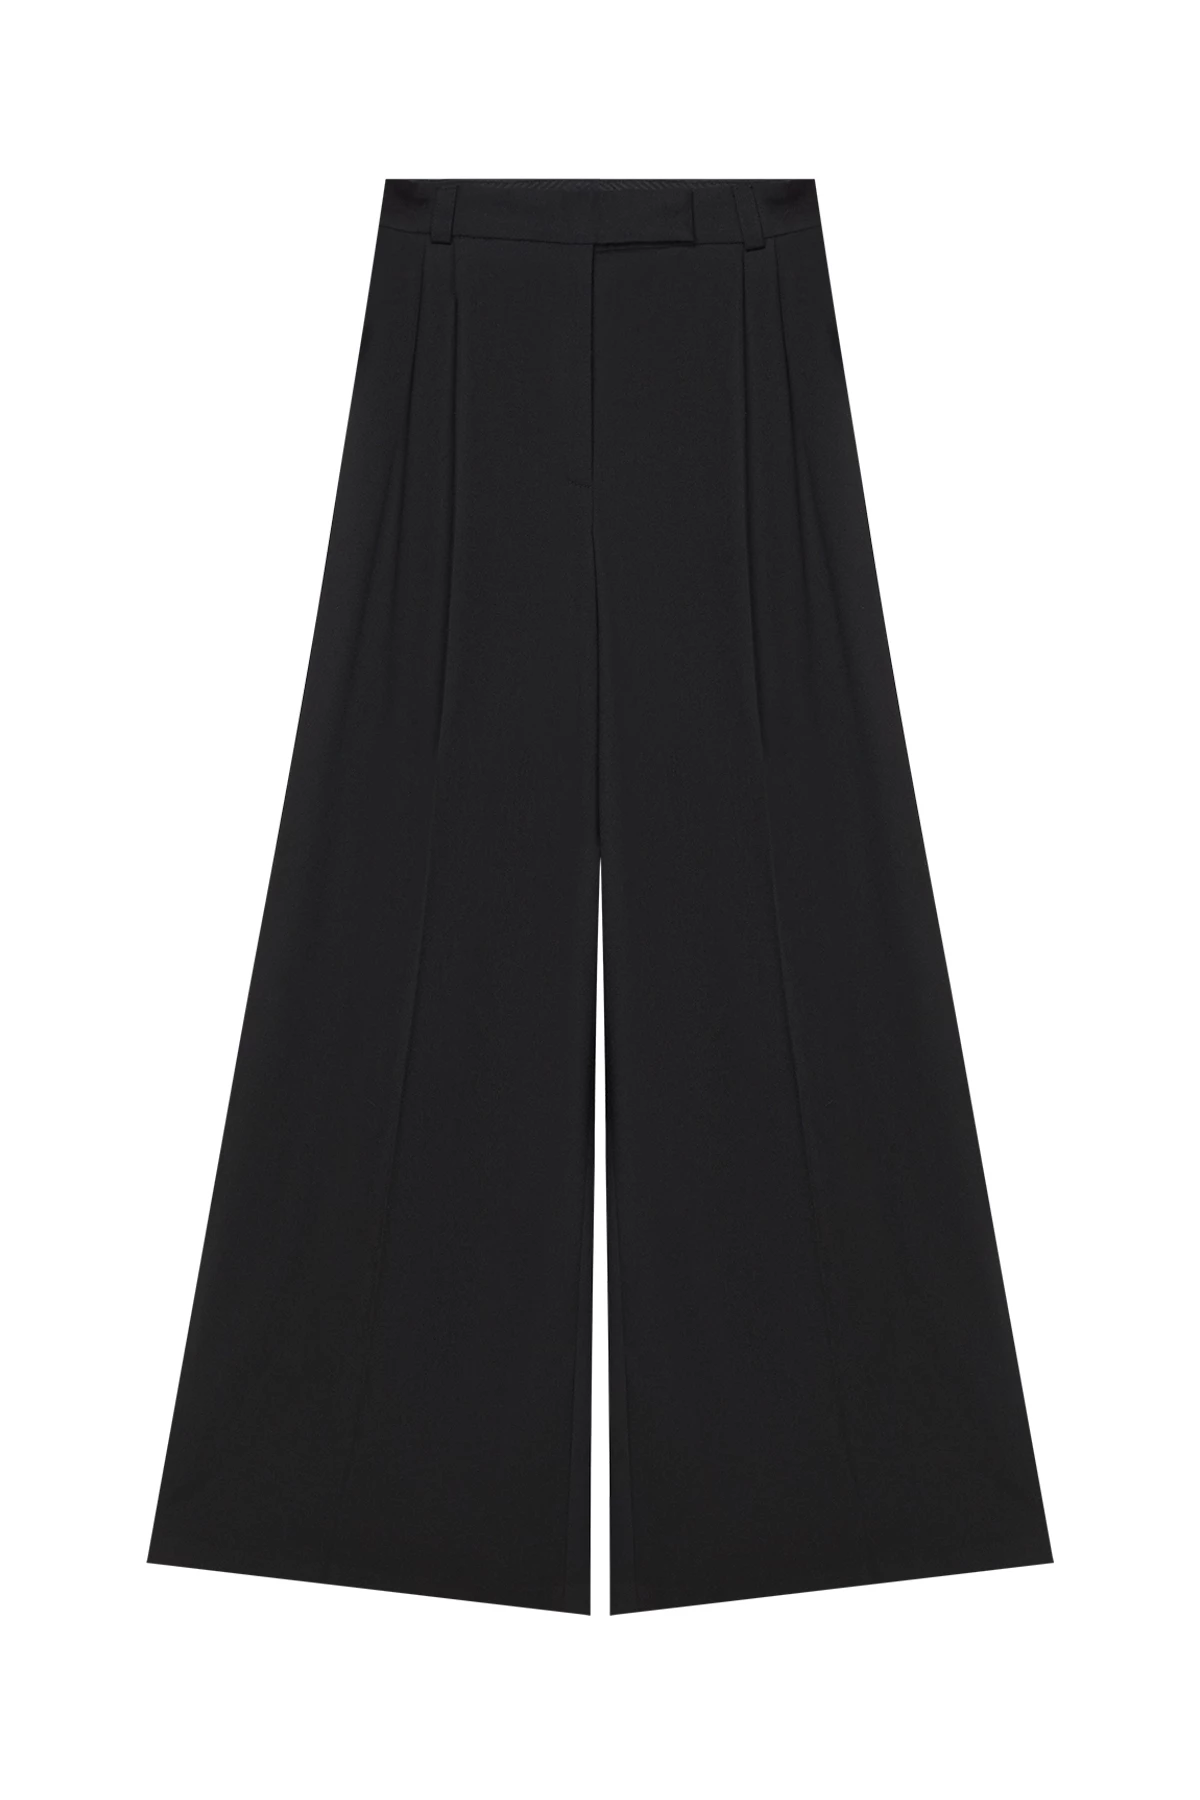 Black palazzo pants made of suit fabric with viscose, photo 6